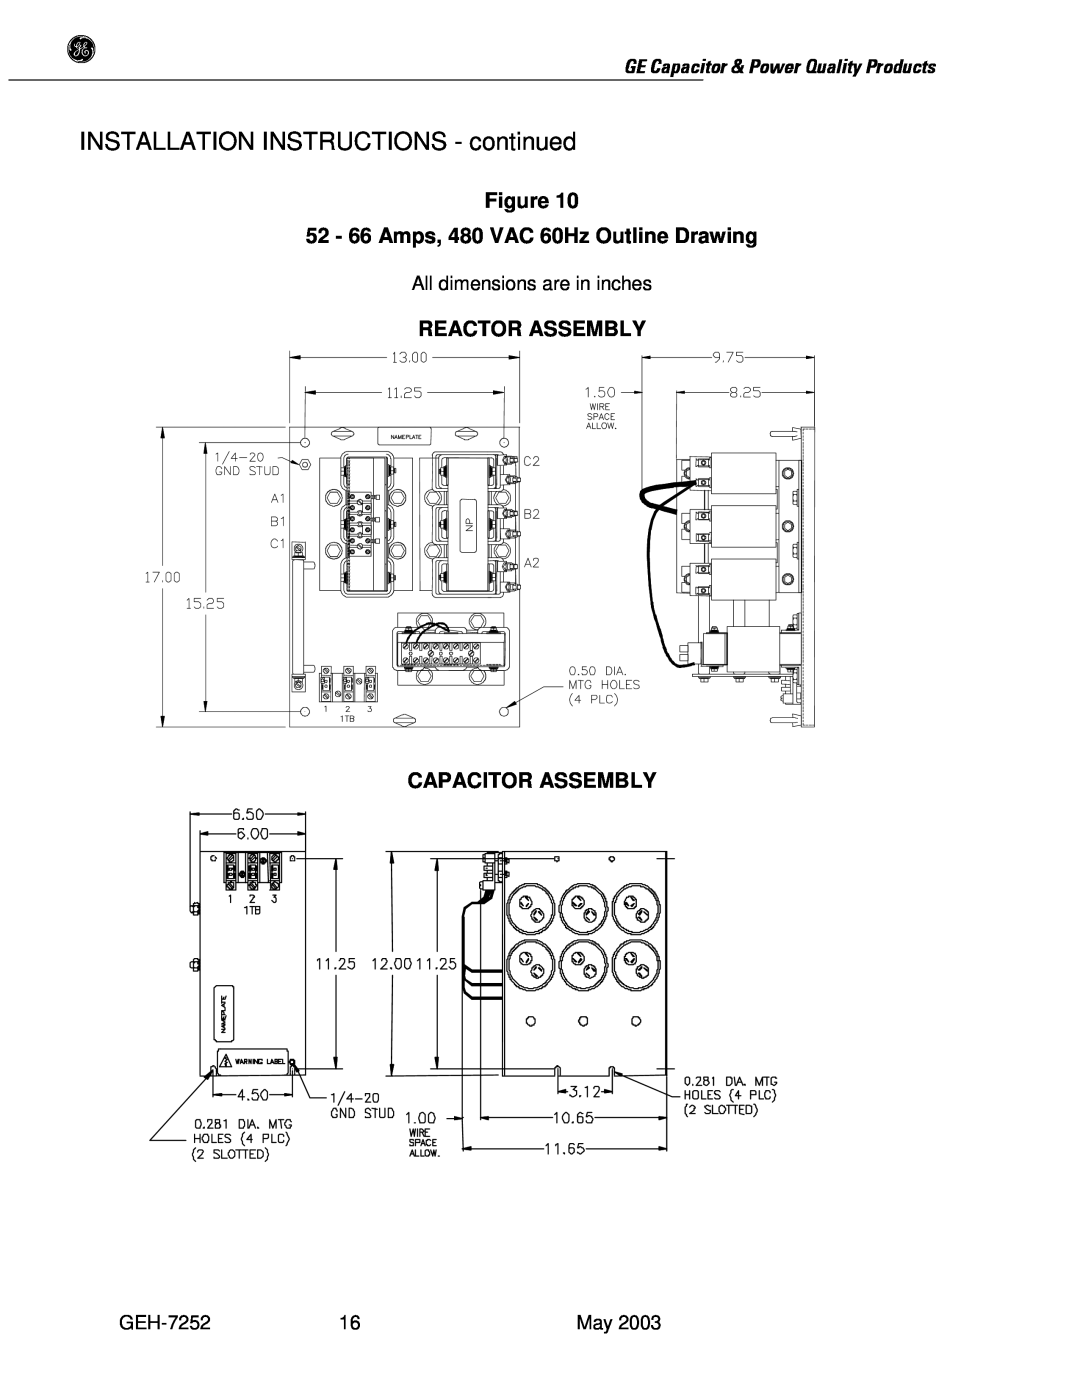 GE SERIES B 480 66 Amps, 480 VAC 60Hz Outline Drawing, Reactor Assembly Capacitor Assembly, All dimensions are in inches 